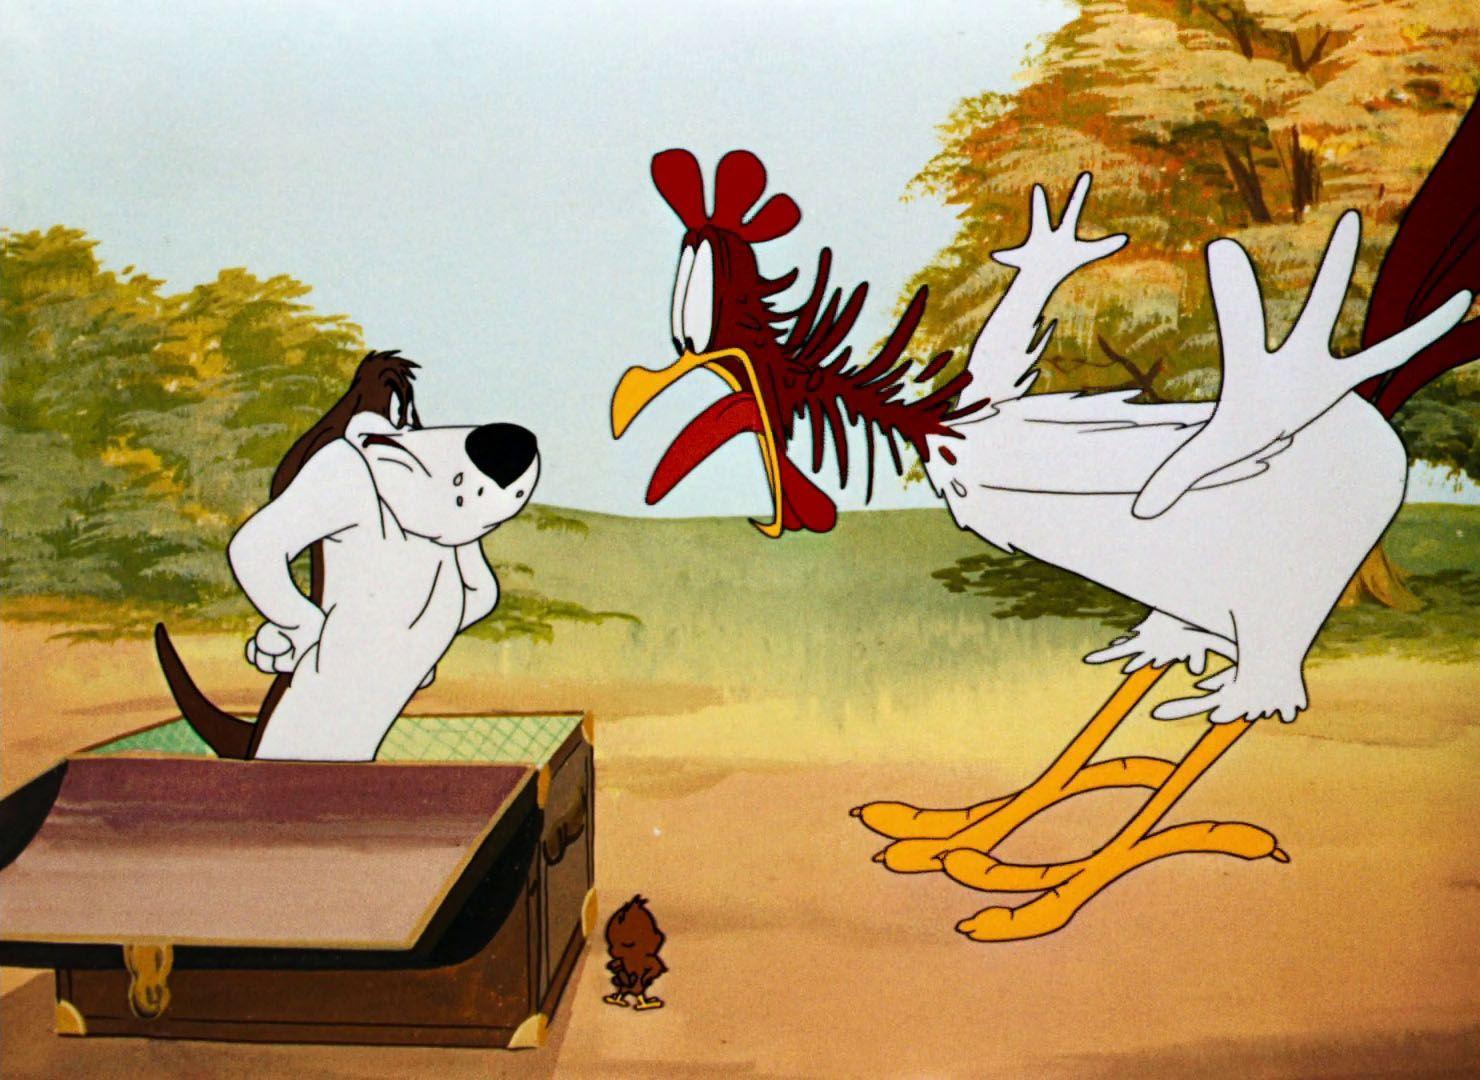 Who Was with Foghorn Leghorn. Looney Tunes Picture: The Foghorn